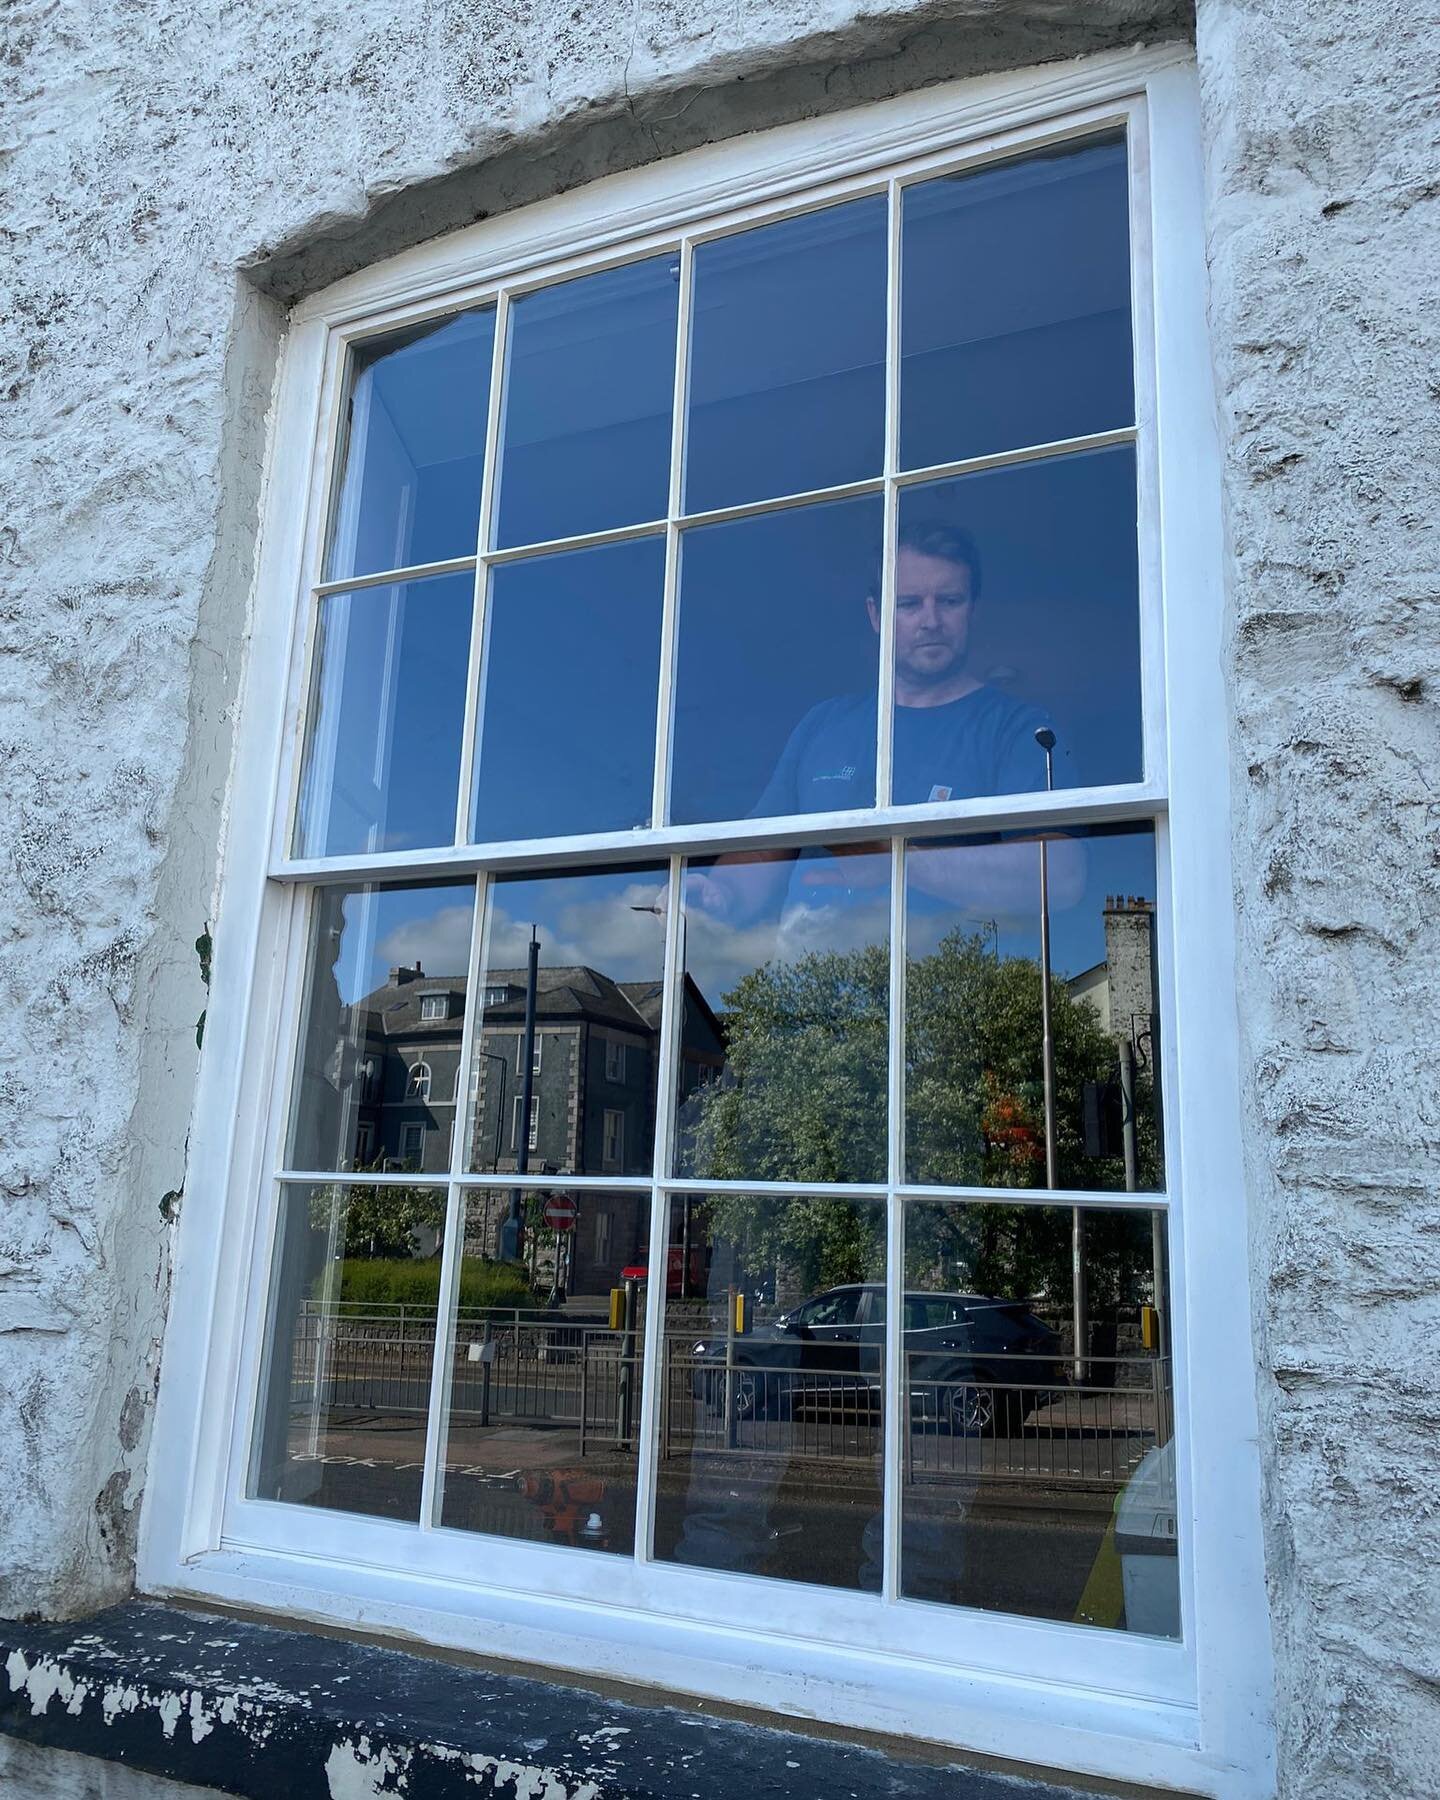 Back up to #Ulverston this morning to re-install the sashes that we have renovated, draught proofed and installed acoustic laminate glass due the the window being very close to a busy road. The difference in the sound was noticeable as soon as we put